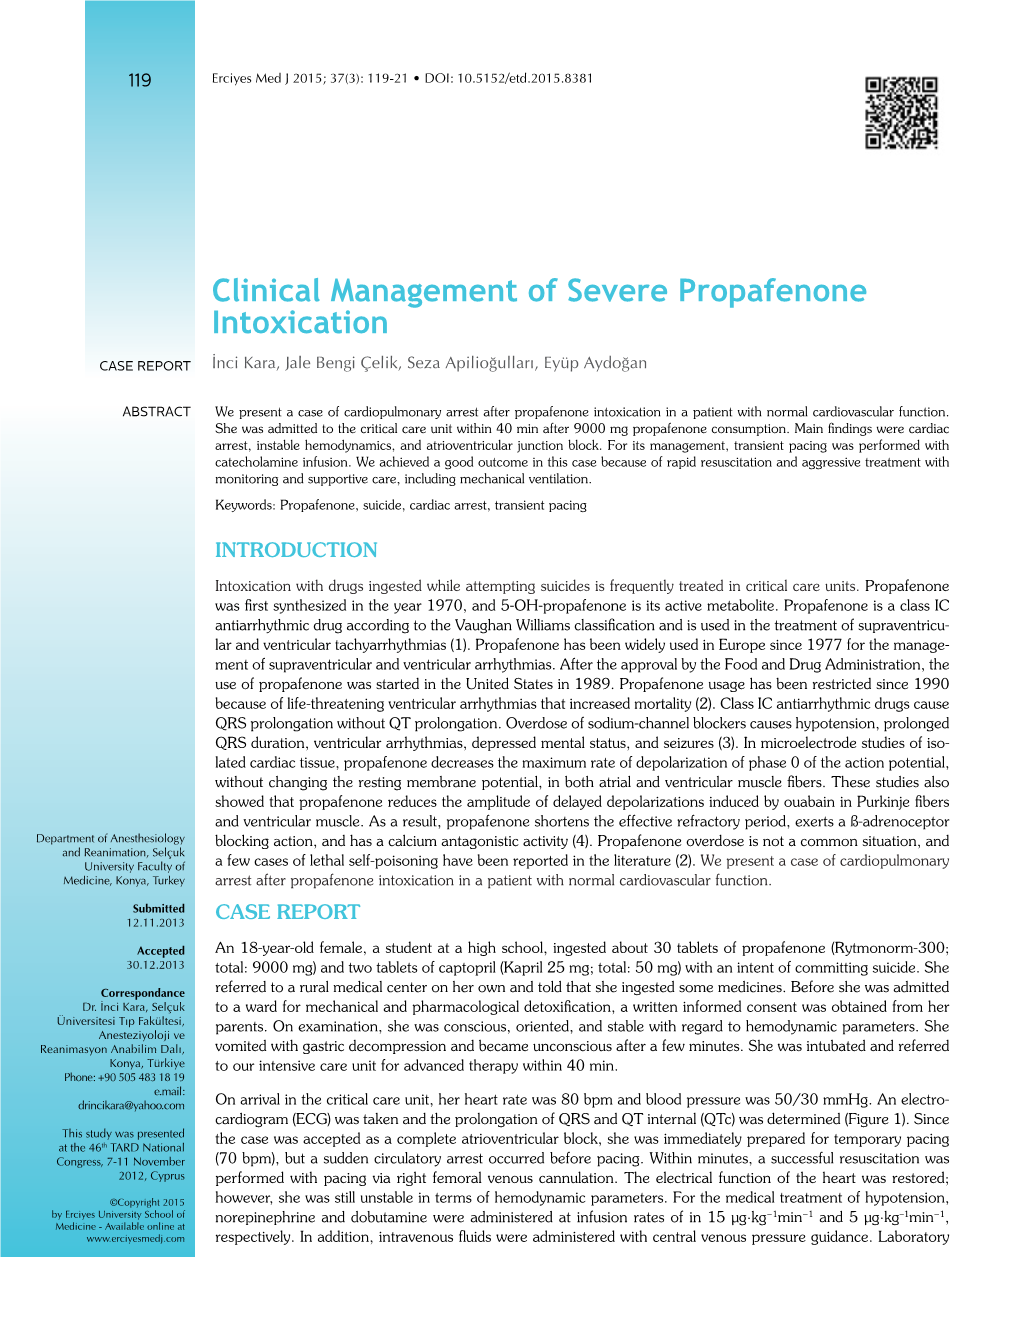 Clinical Management of Severe Propafenone Intoxication